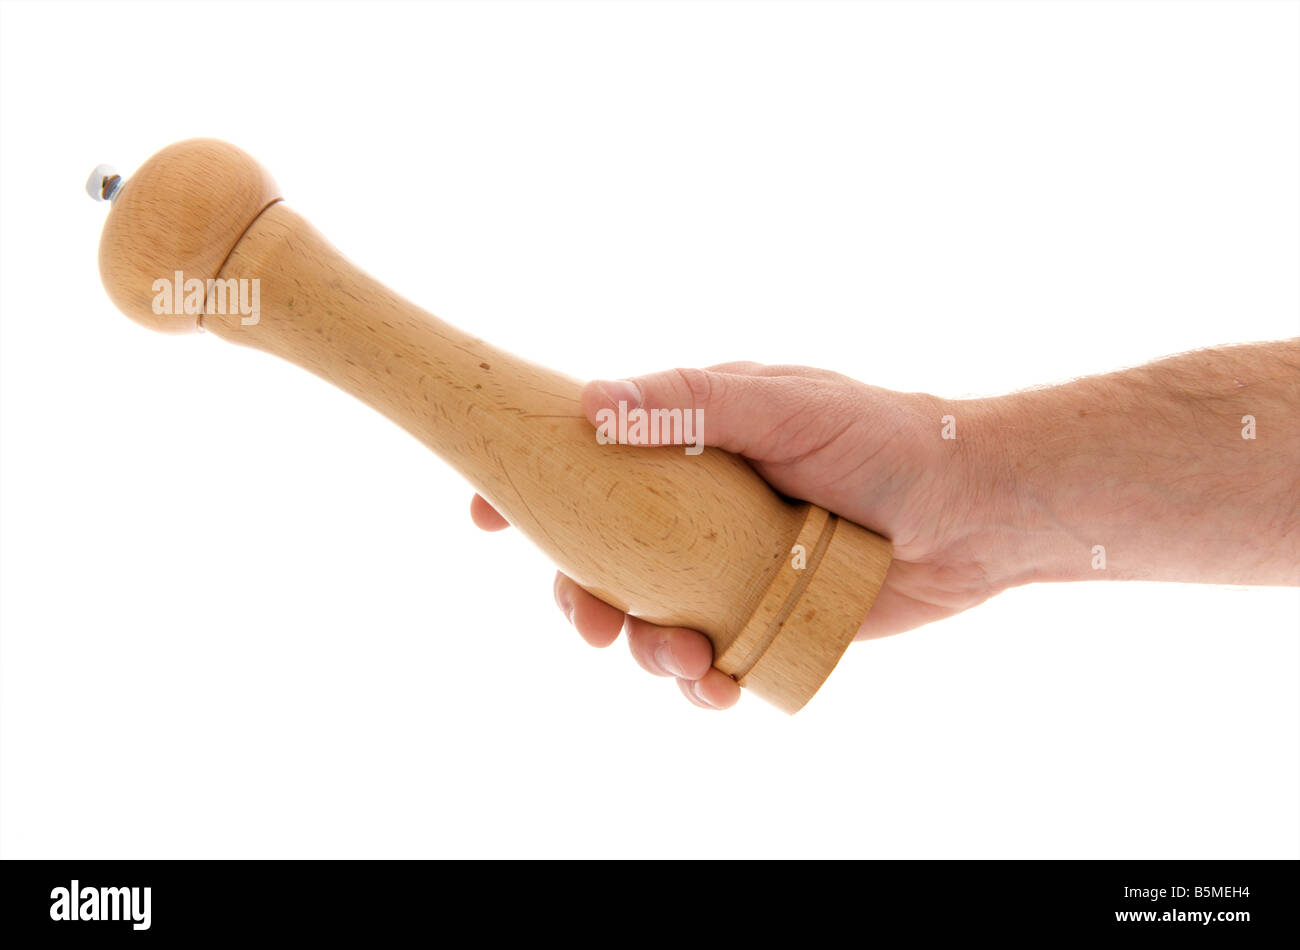 mans male right outstretched hand holding a pepper grinder against a white background Stock Photo